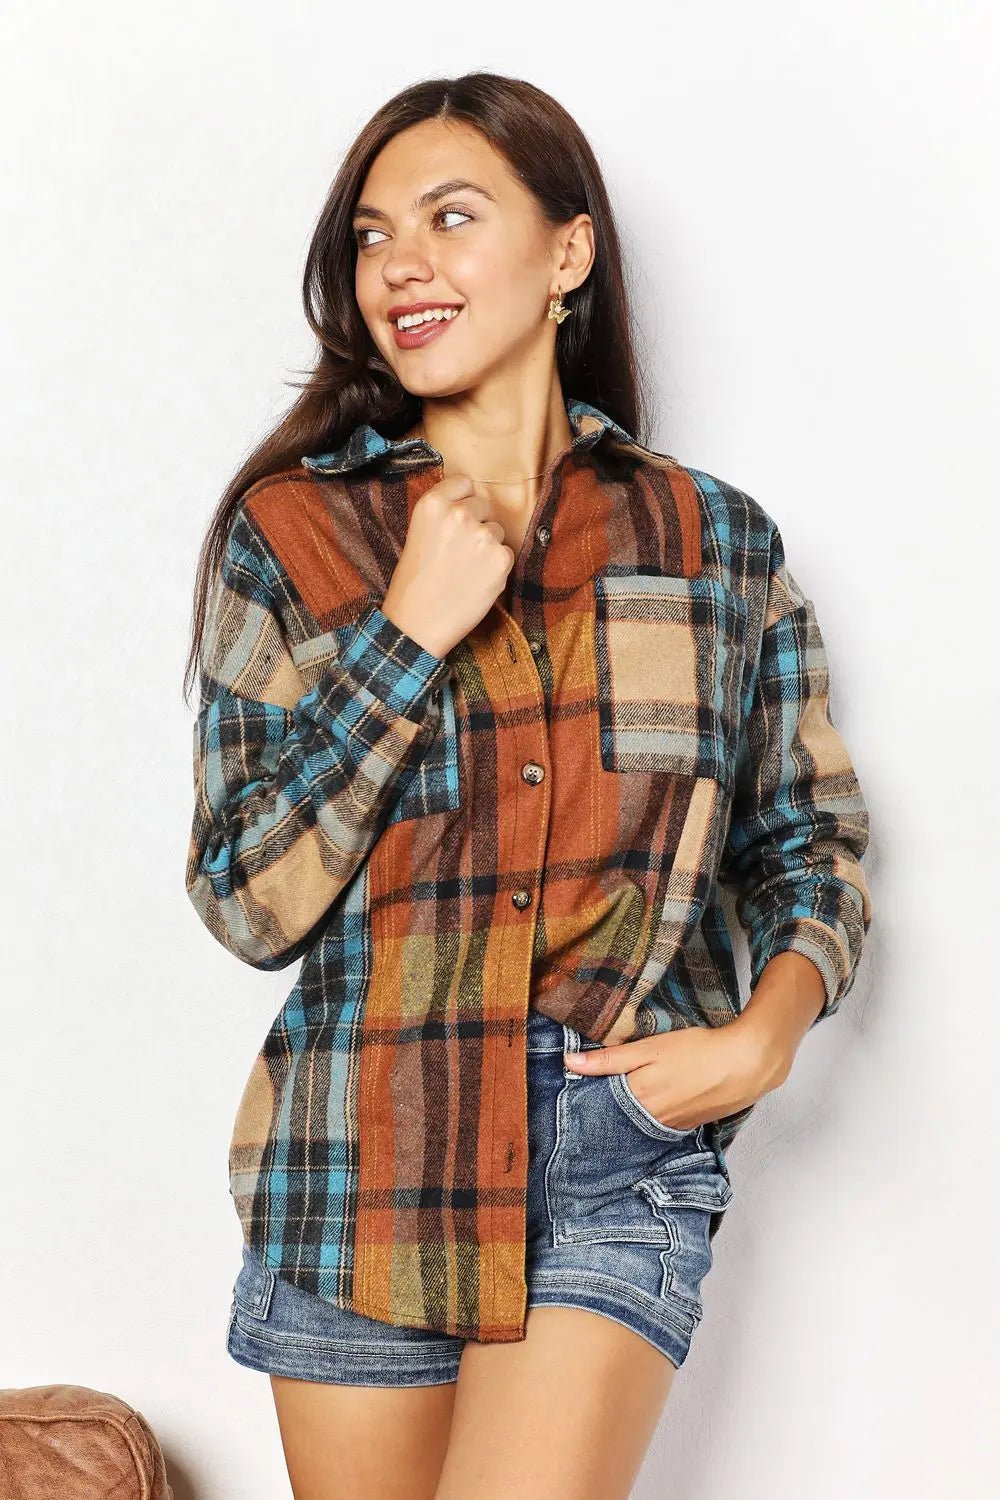 CURVED HEM LONG SLEEVE BUTTON DOWN FLANNEL MULTICOLOR - MeadeuxCURVED HEM LONG SLEEVE BUTTON DOWN FLANNEL MULTICOLORTopsMeadeux